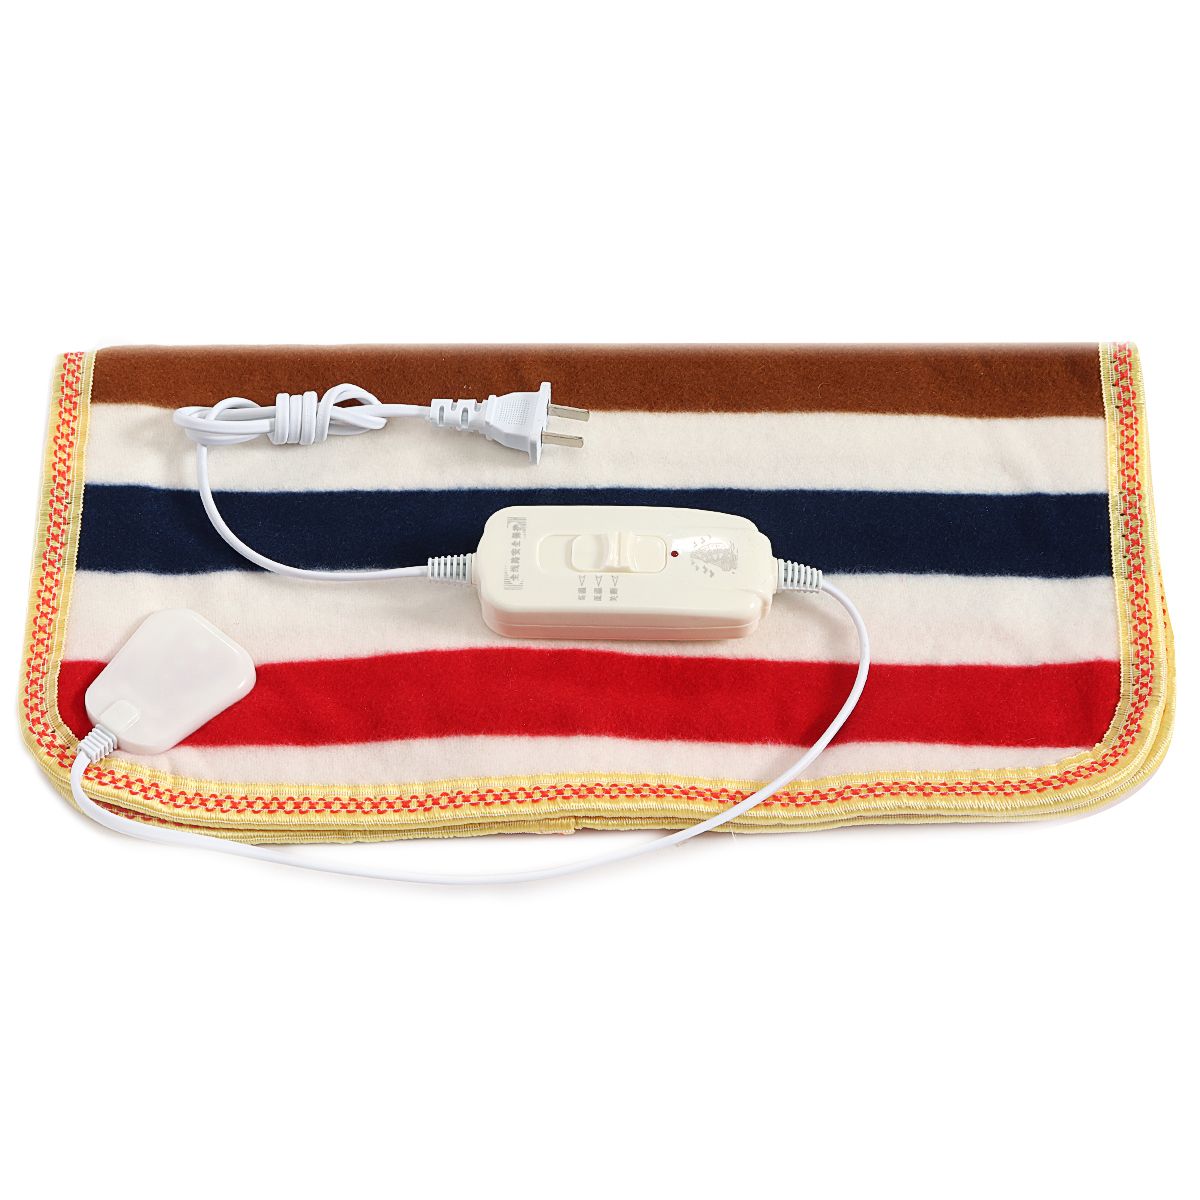 Car-Pet-Electric-Heating-Pad-Blanket-Heater-Dog-Cat-Bunny-Warm-For-Winter-Heated-Mat-1616174